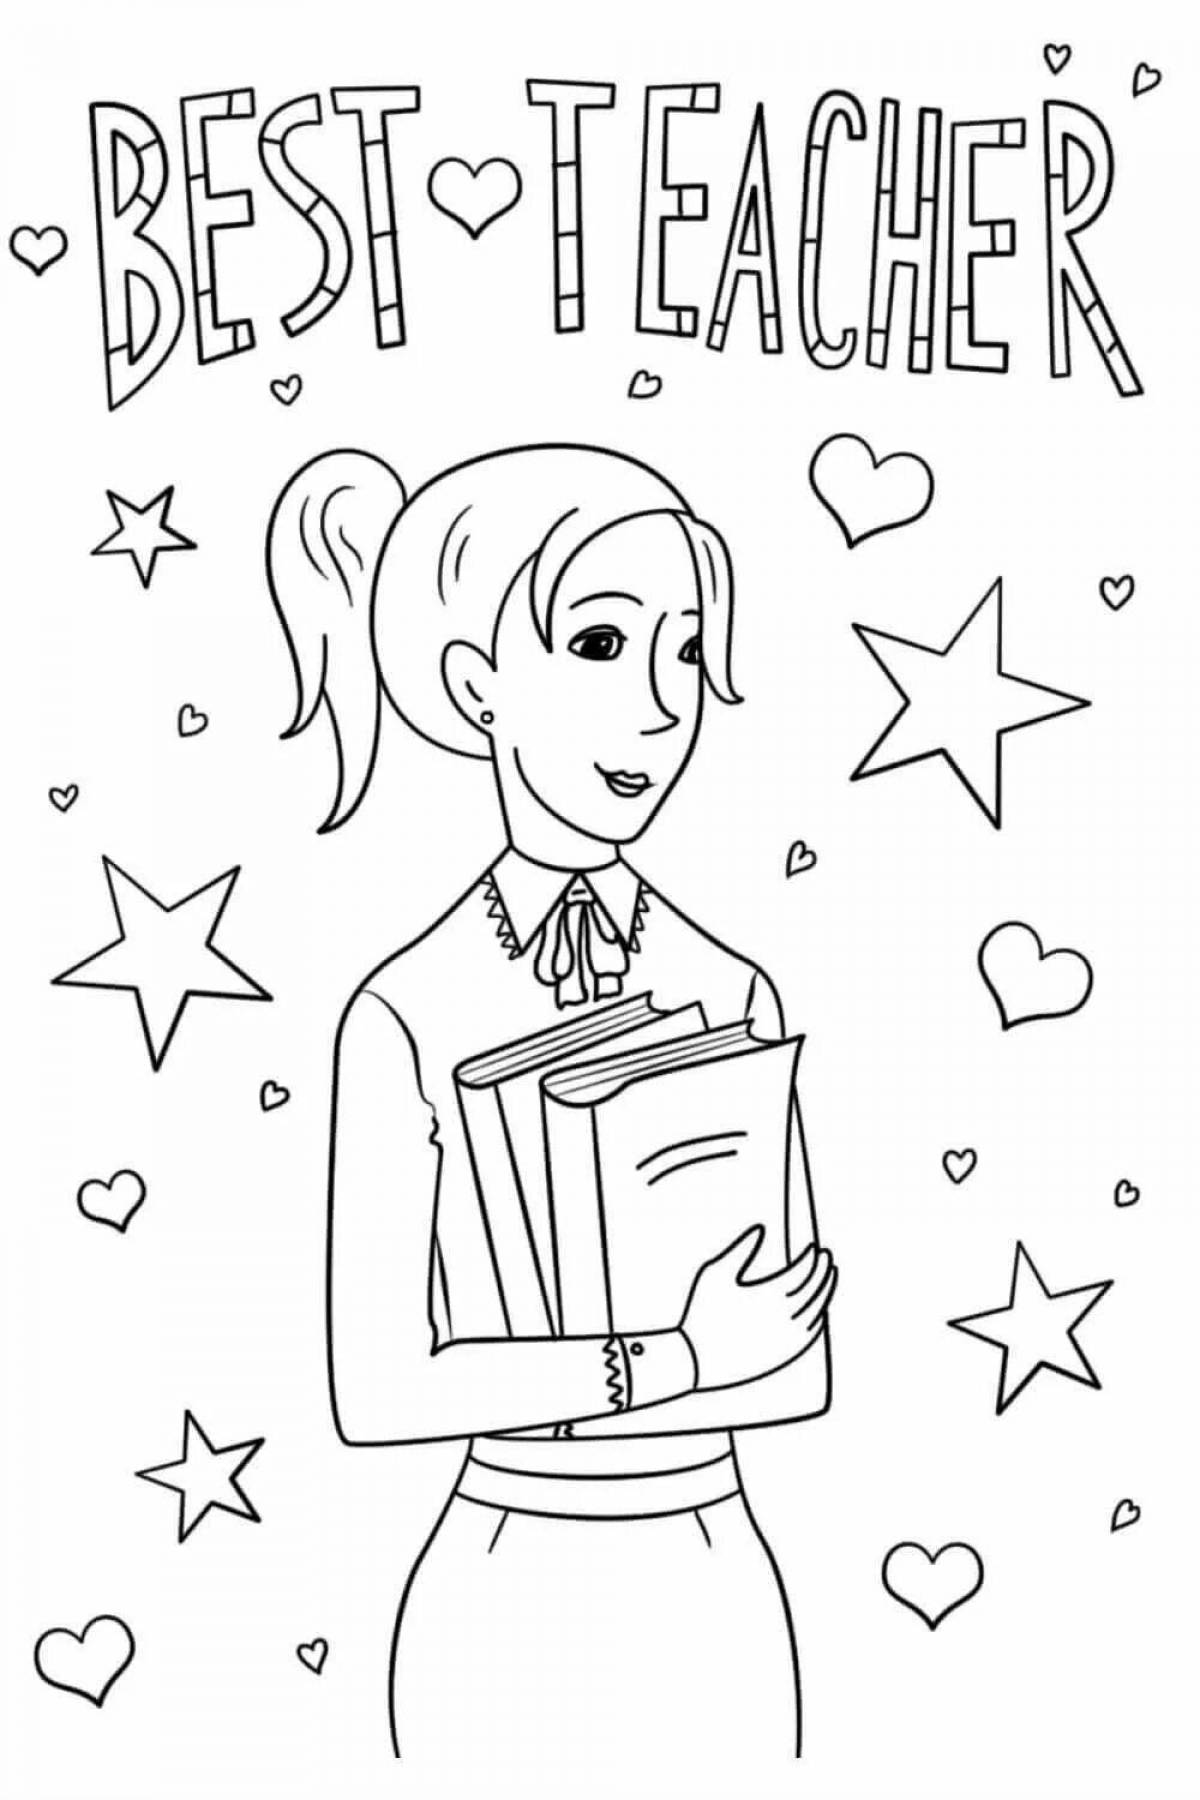 Sparkly happy birthday teacher coloring page